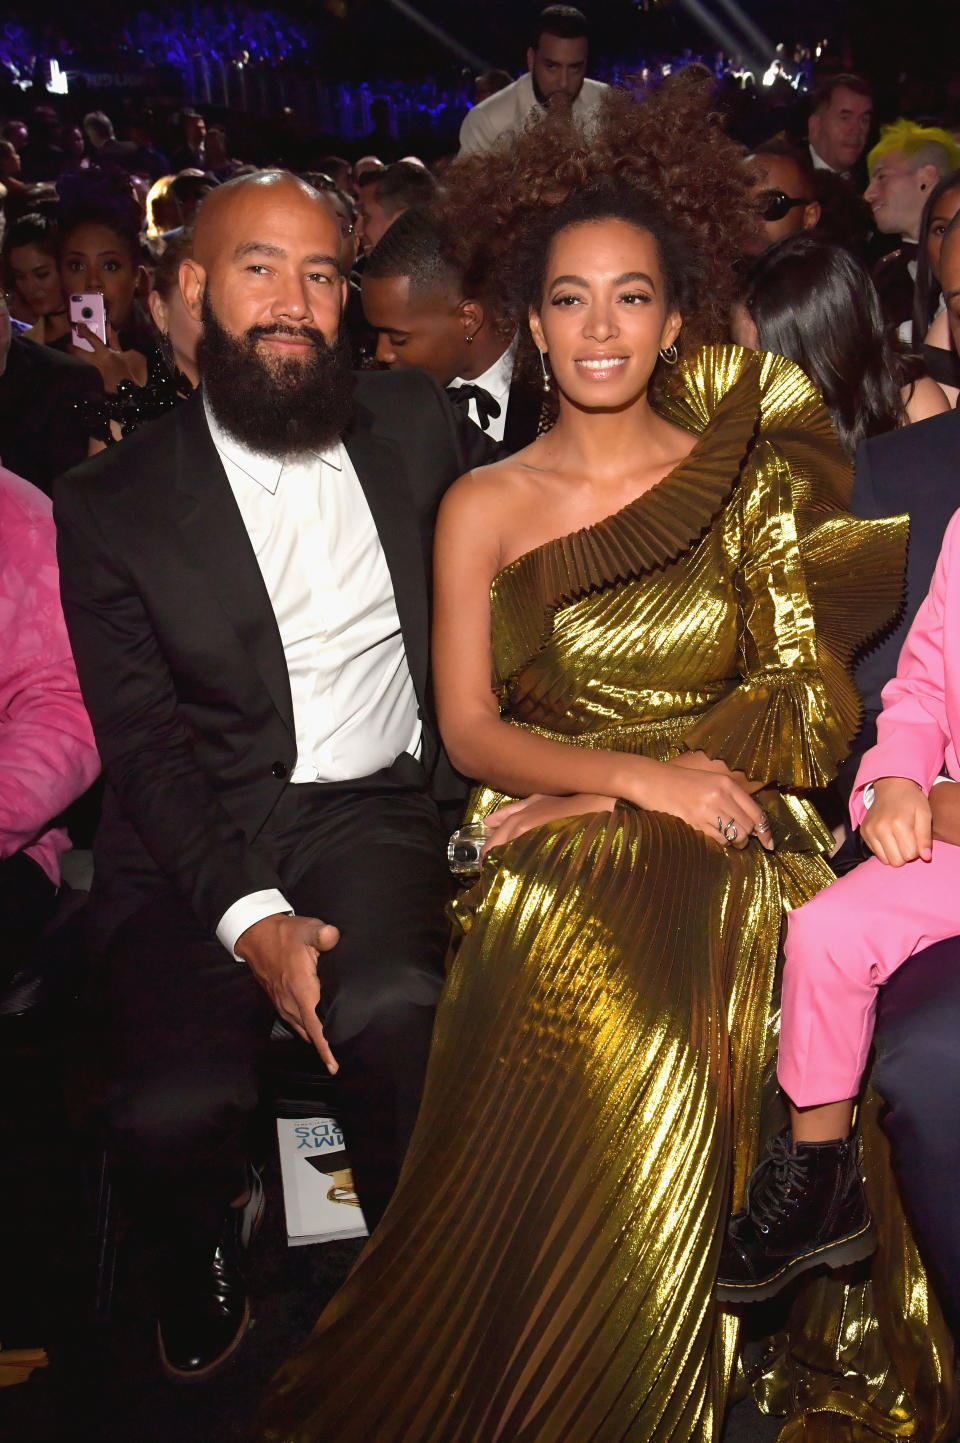 LOS ANGELES, CA - FEBRUARY 12:  Alan Ferguson and singer Solange Knowles during The 59th GRAMMY Awards at STAPLES Center on February 12, 2017 in Los Angeles, California.  (Photo by Lester Cohen/Getty Images for NARAS)